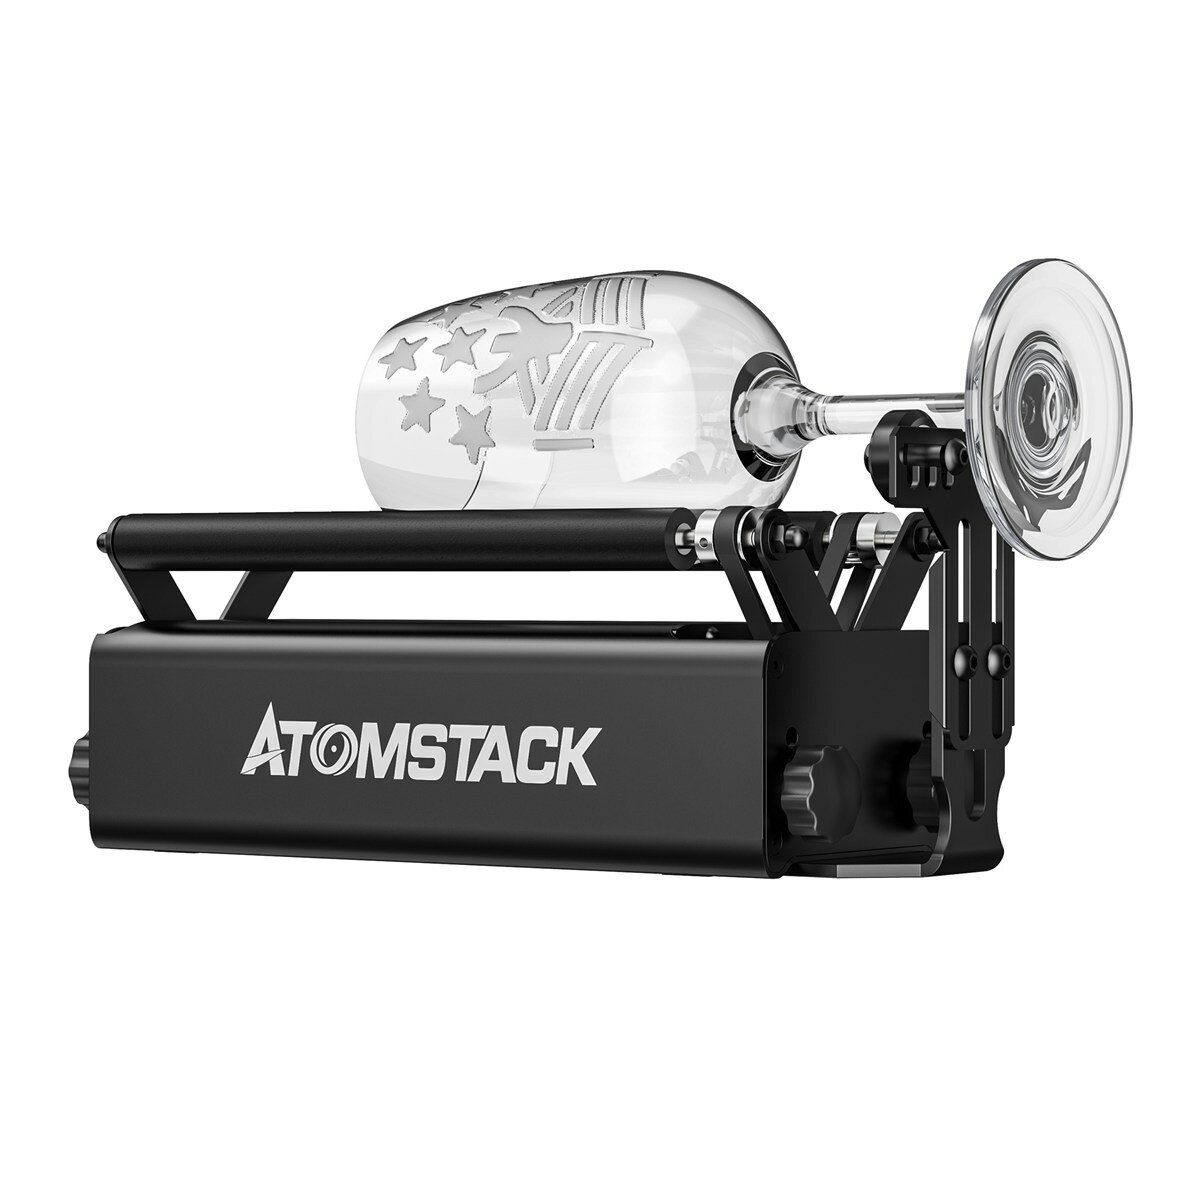 

[US DIRECT] Atomstack Upgraded R3 Pro Rotary Roller with Separable support module and Extension Towers